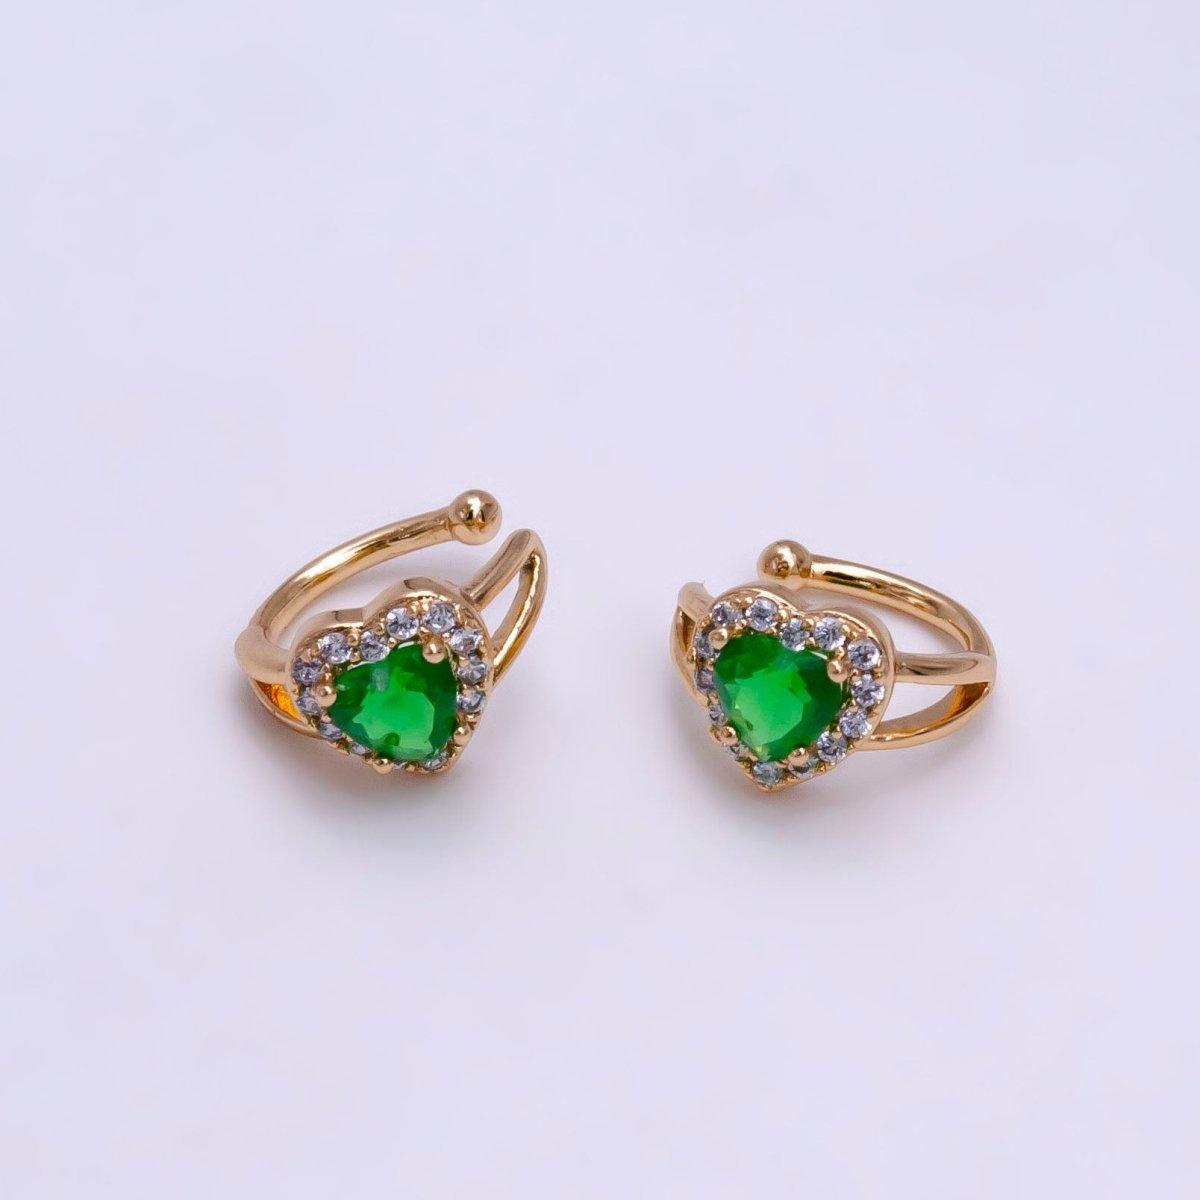 1x Blue Green Ear Cuffs for Non Pierced Ears Micro Pave Crystal Gold Clip on Conch Cuff Earrings for Women Girls, AI-062 AI-063. - DLUXCA